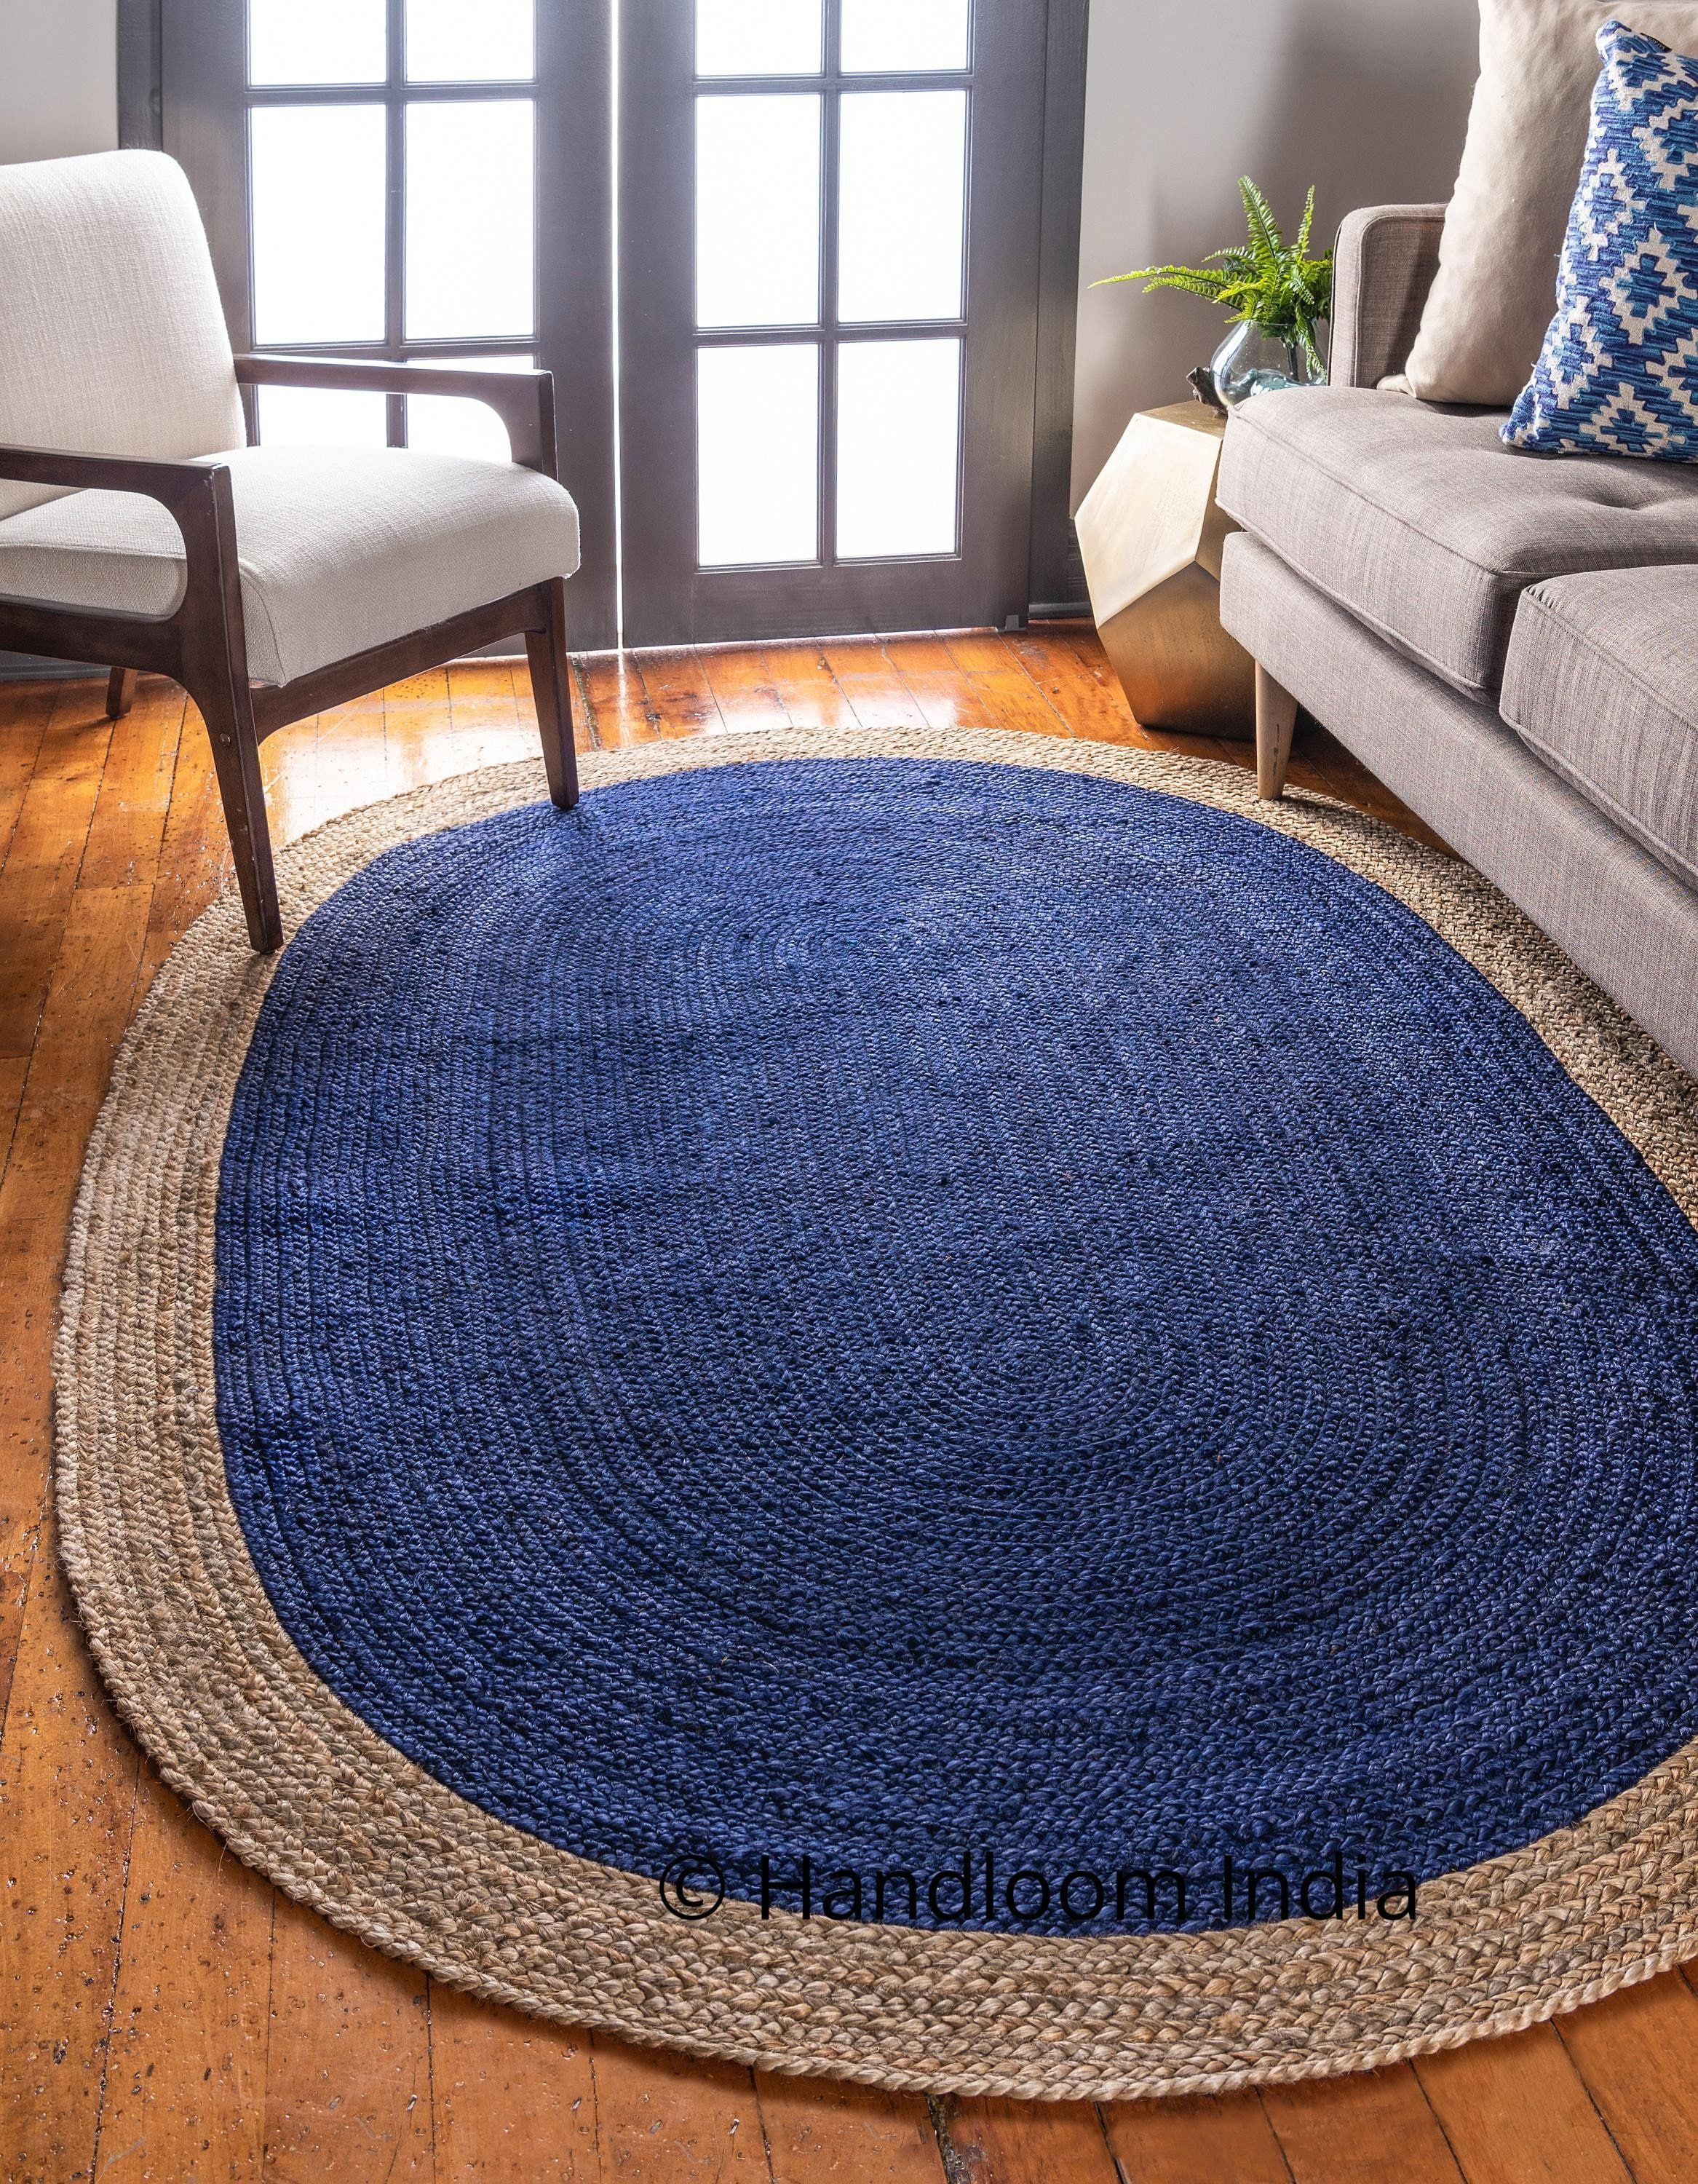 Oval Navy Blue Hand Woven Jute Rugs Indian Braided Jute Rug – Etsy For Blue Oval Rugs (Photo 1 of 15)